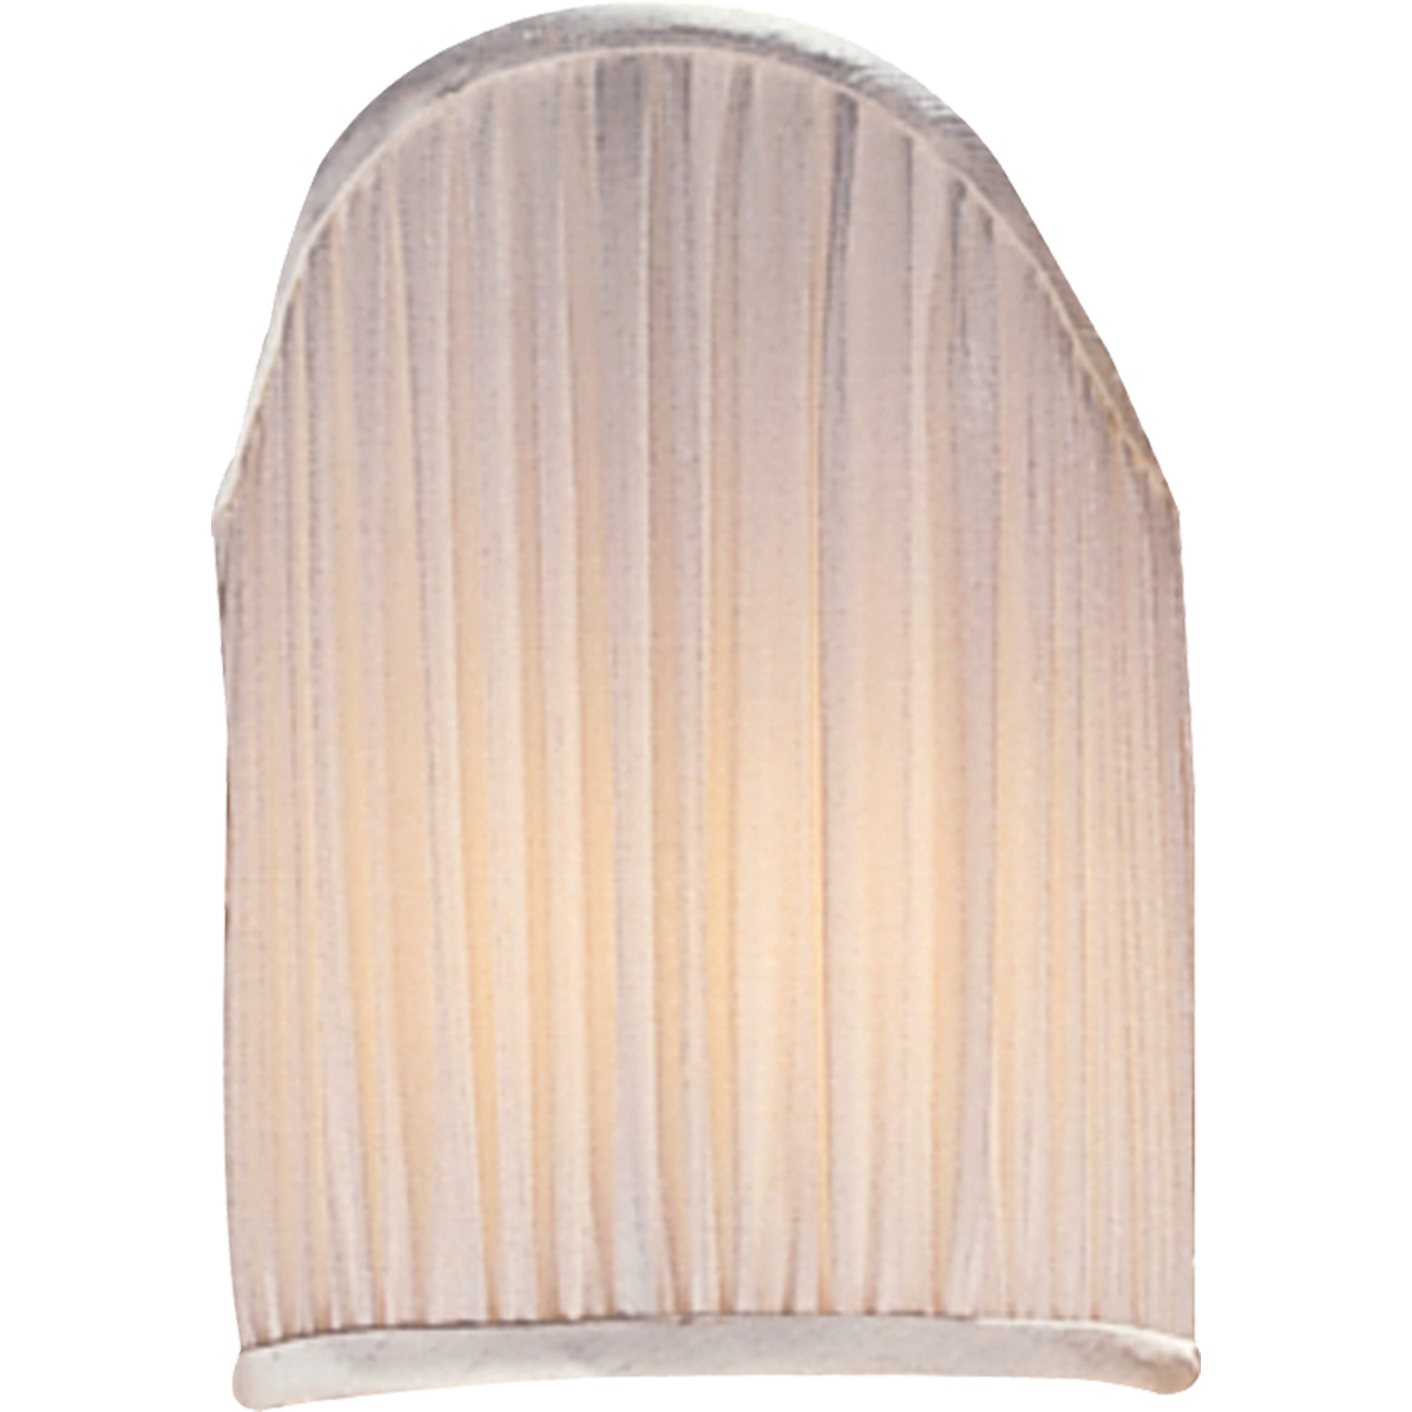 4" x 5.5" Pleated Candle Clip Shield